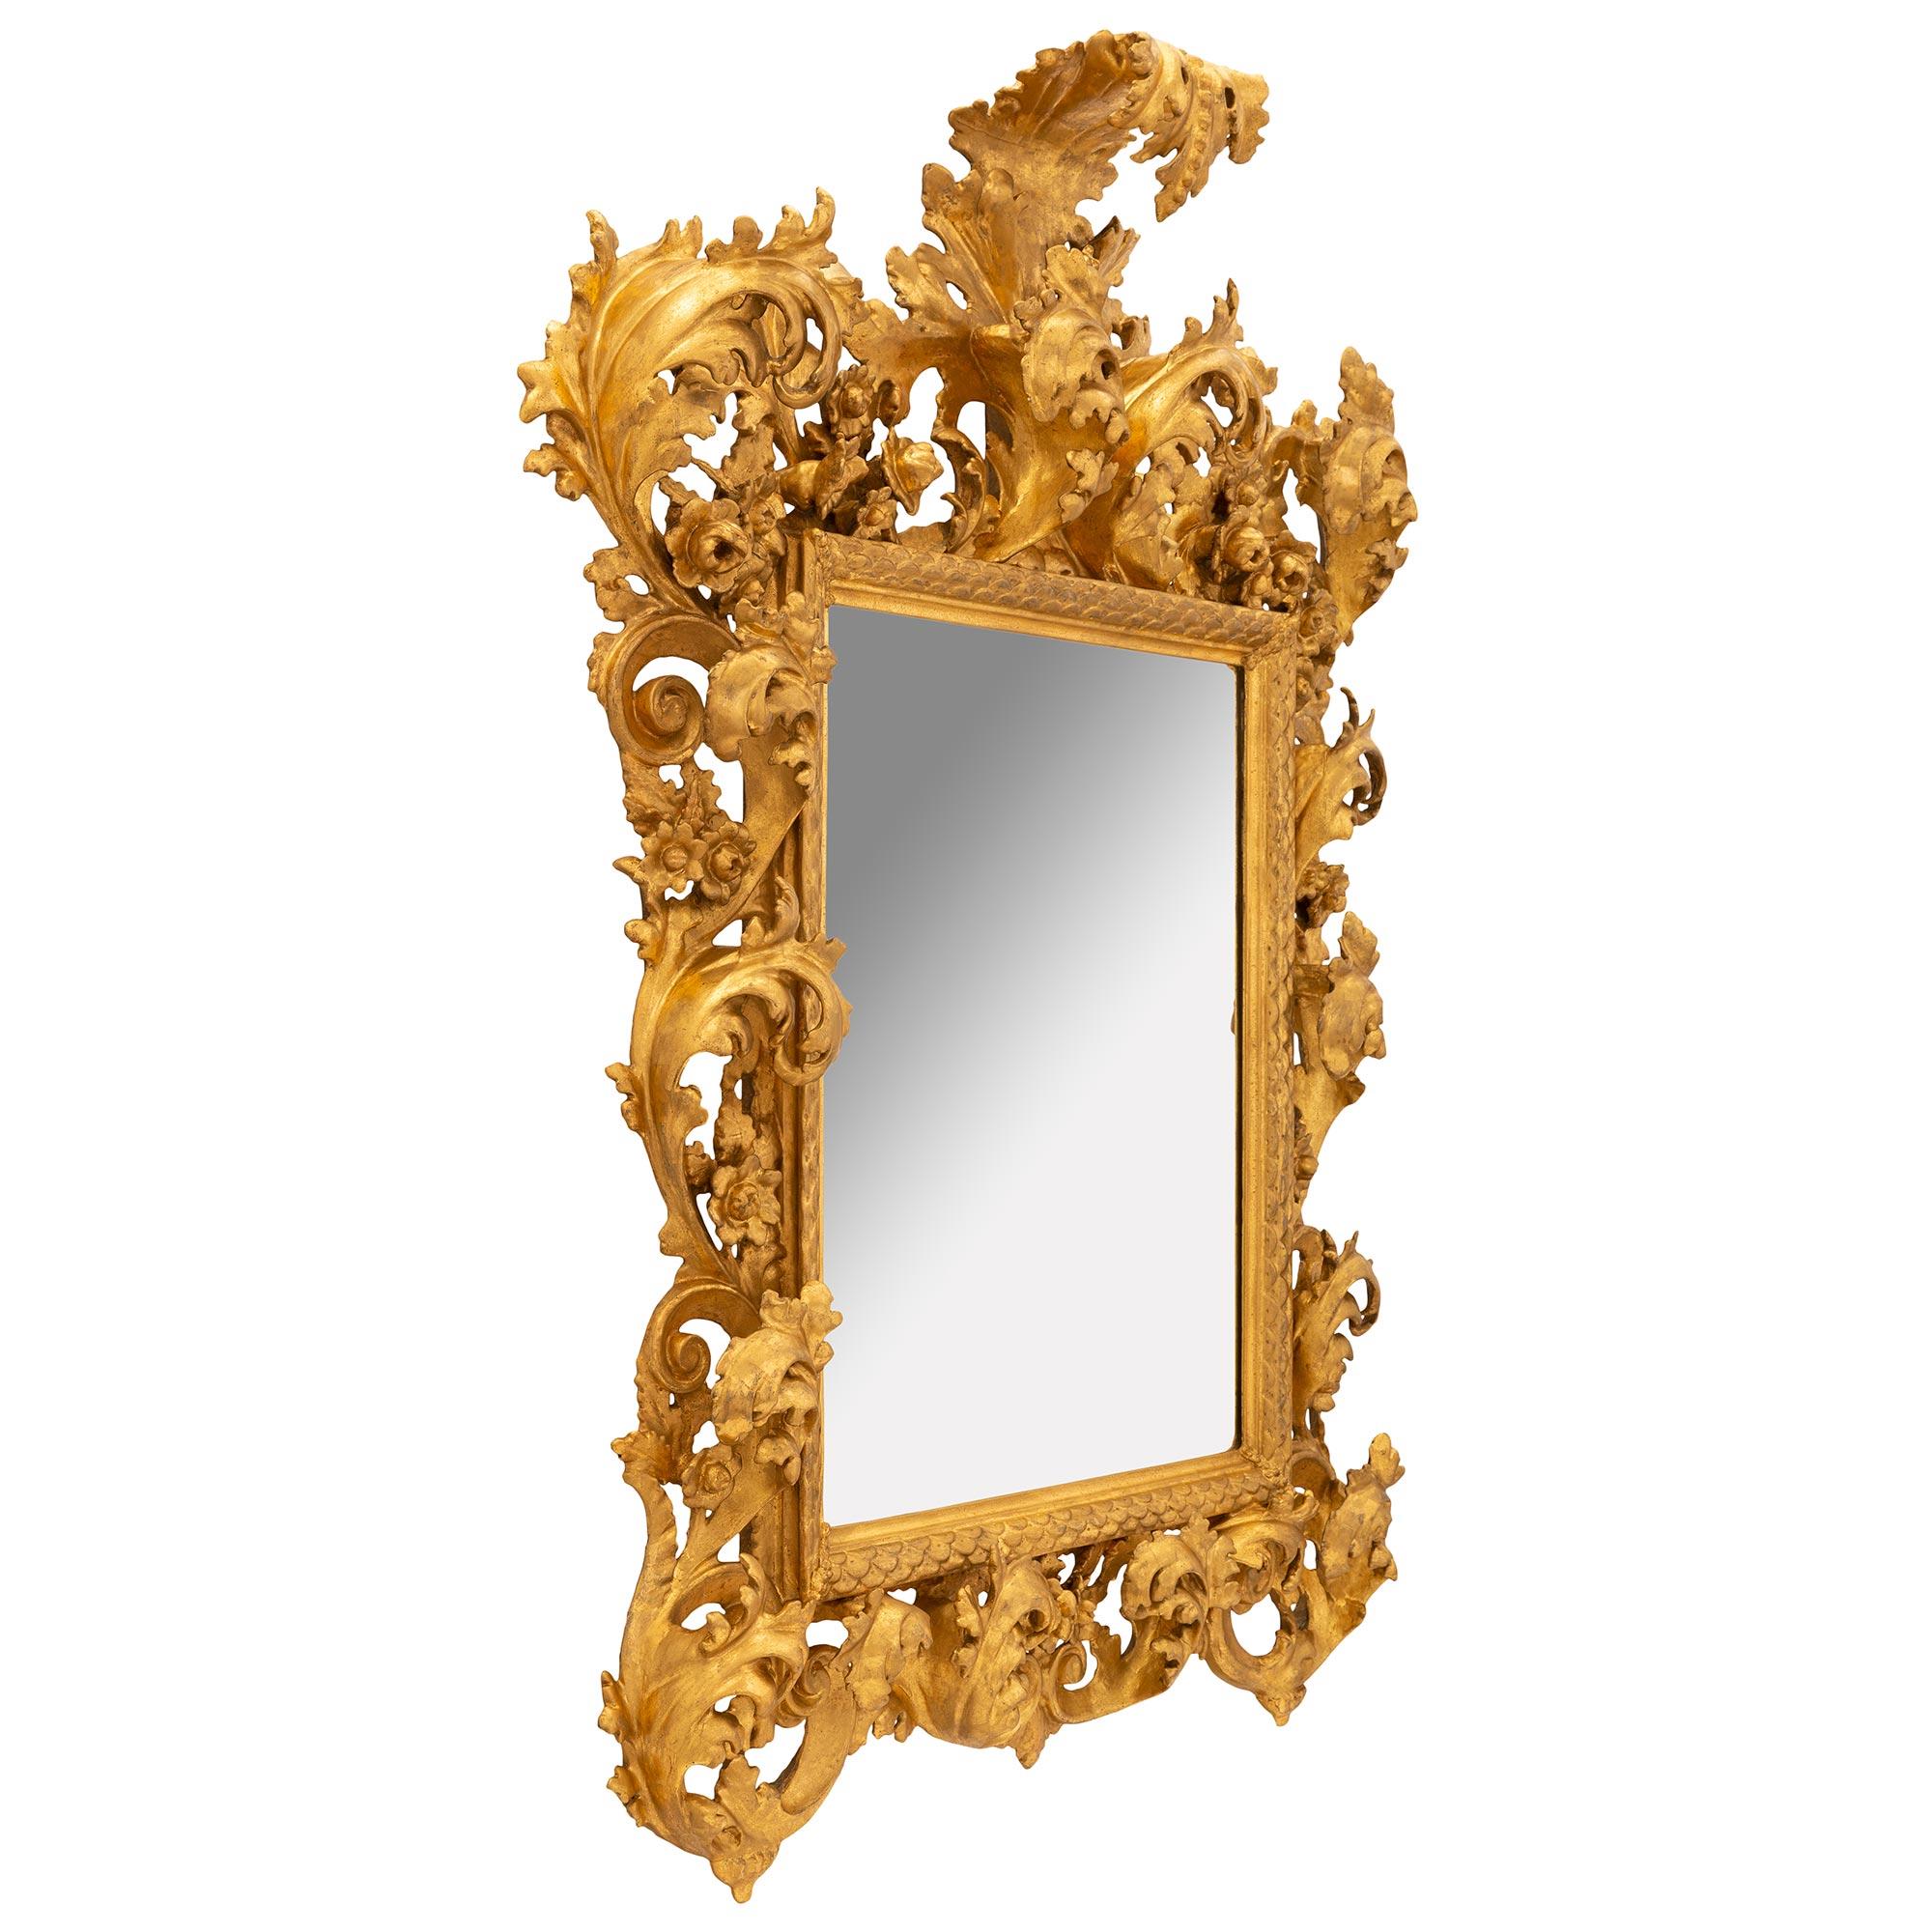 An impressive and most decorative Italian 19th century Baroque st. giltwood mirror. The mirror plate is set within a fine mottled band with a lovely overlapping fish scale like design. The outer frame displays stunning richly carved scrolled foliate